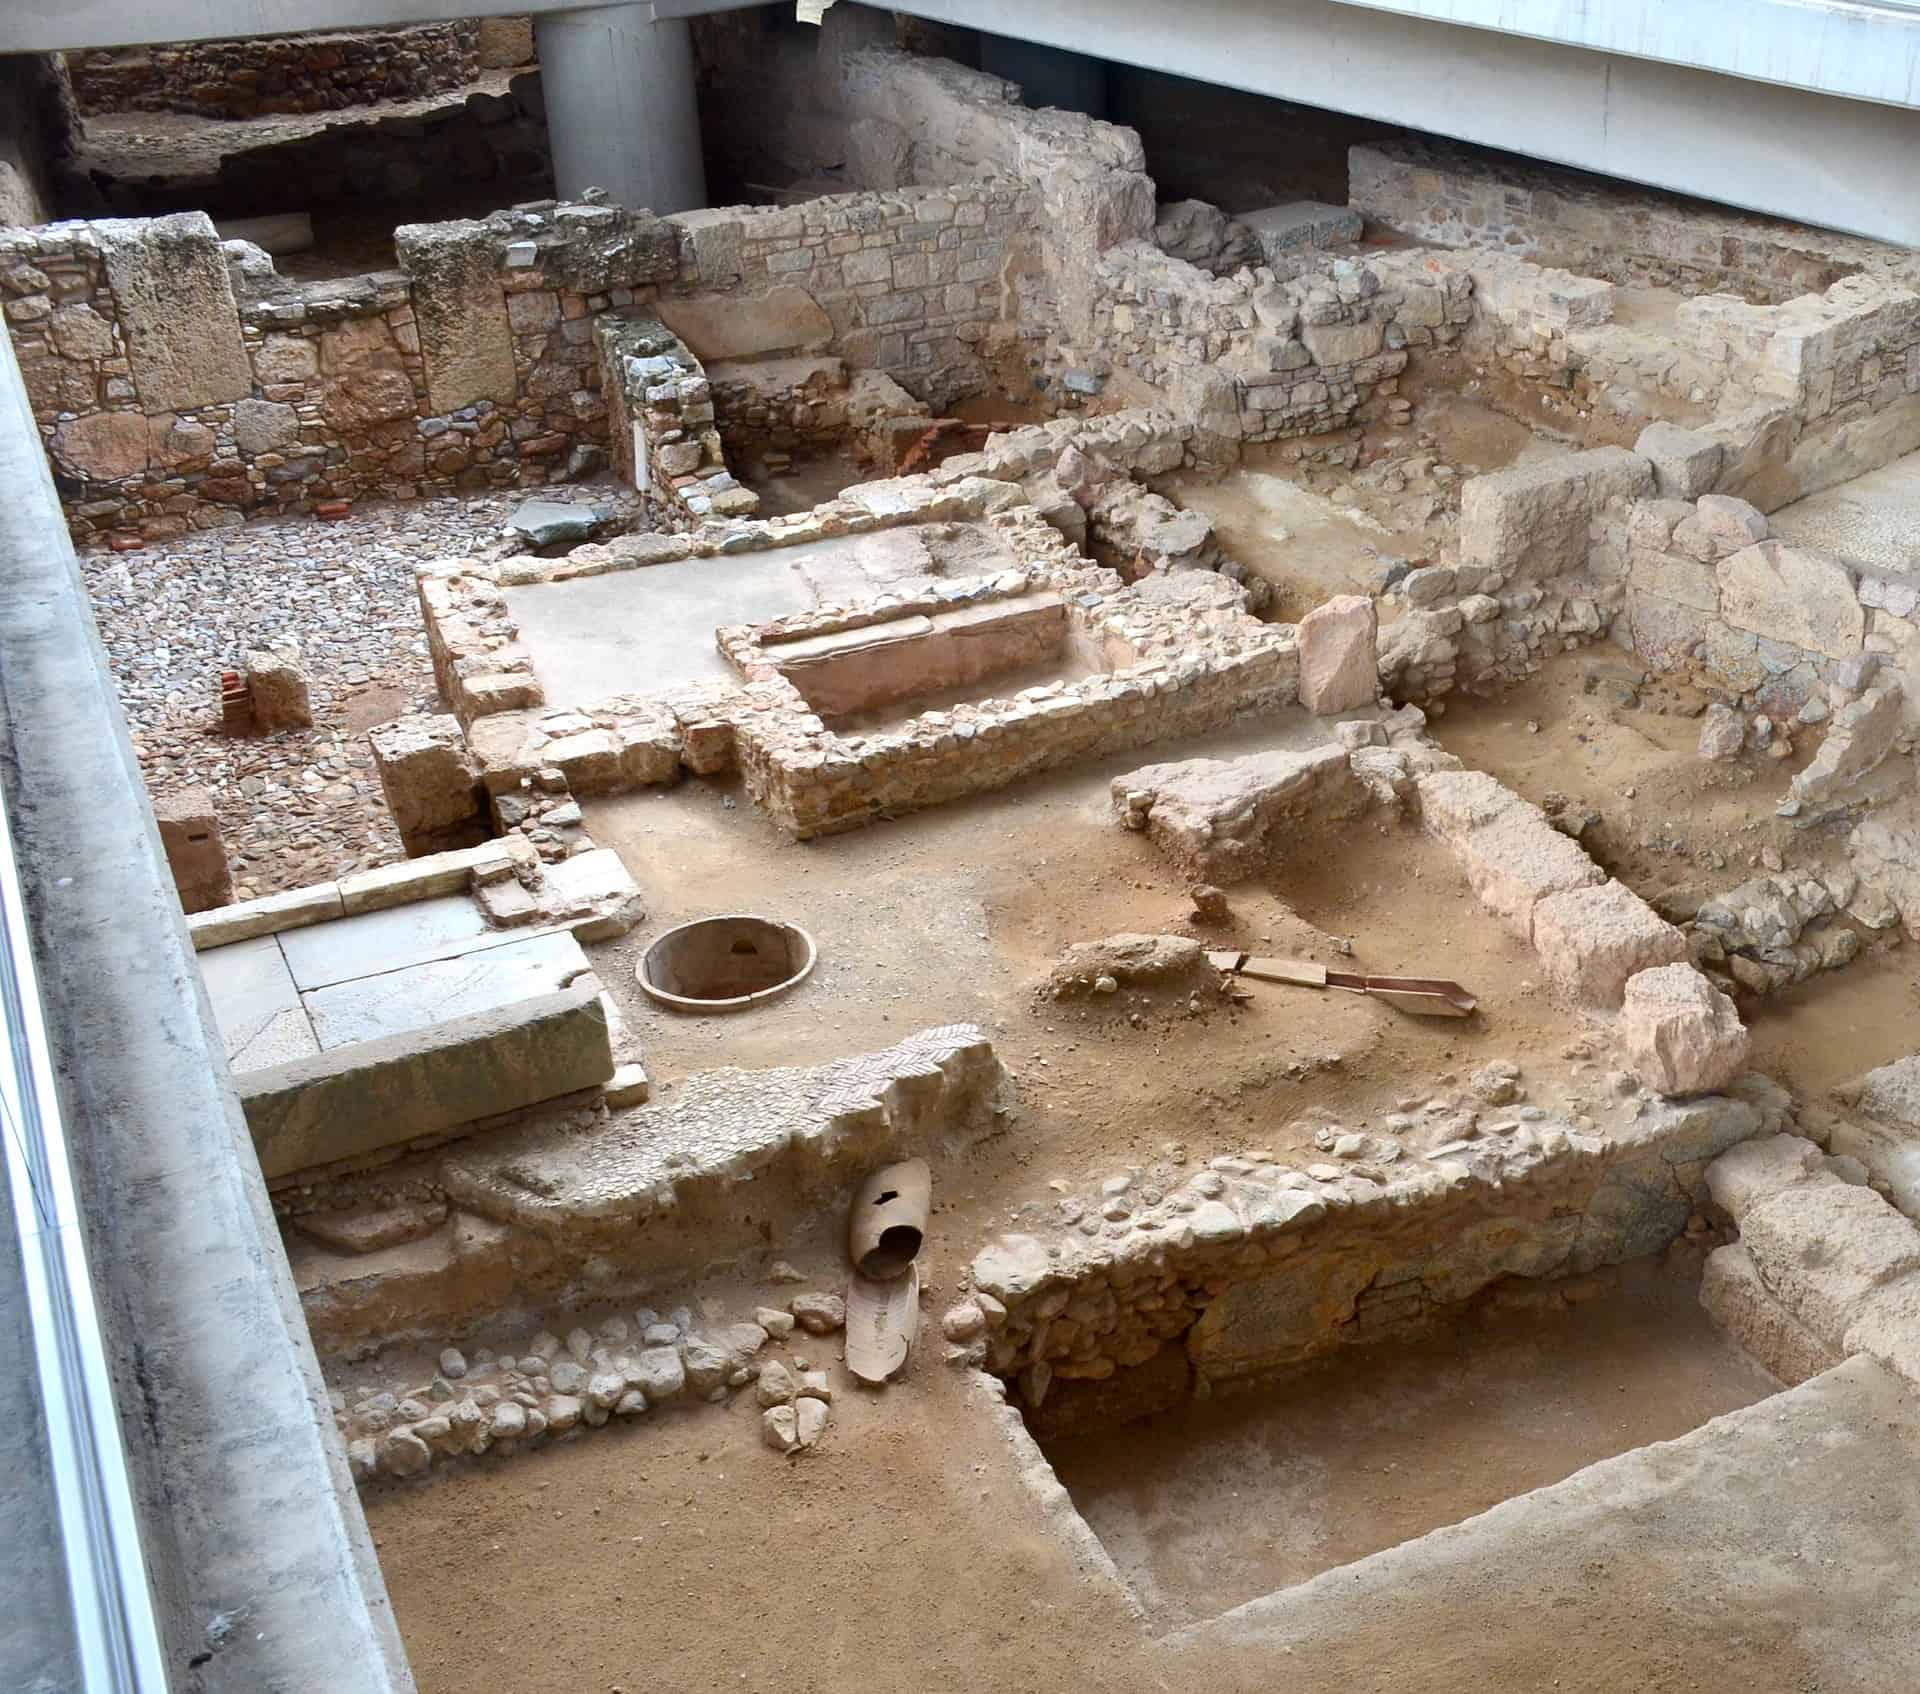 West Bath in the archaeological site at the Acropolis Museum in Athens, Greece